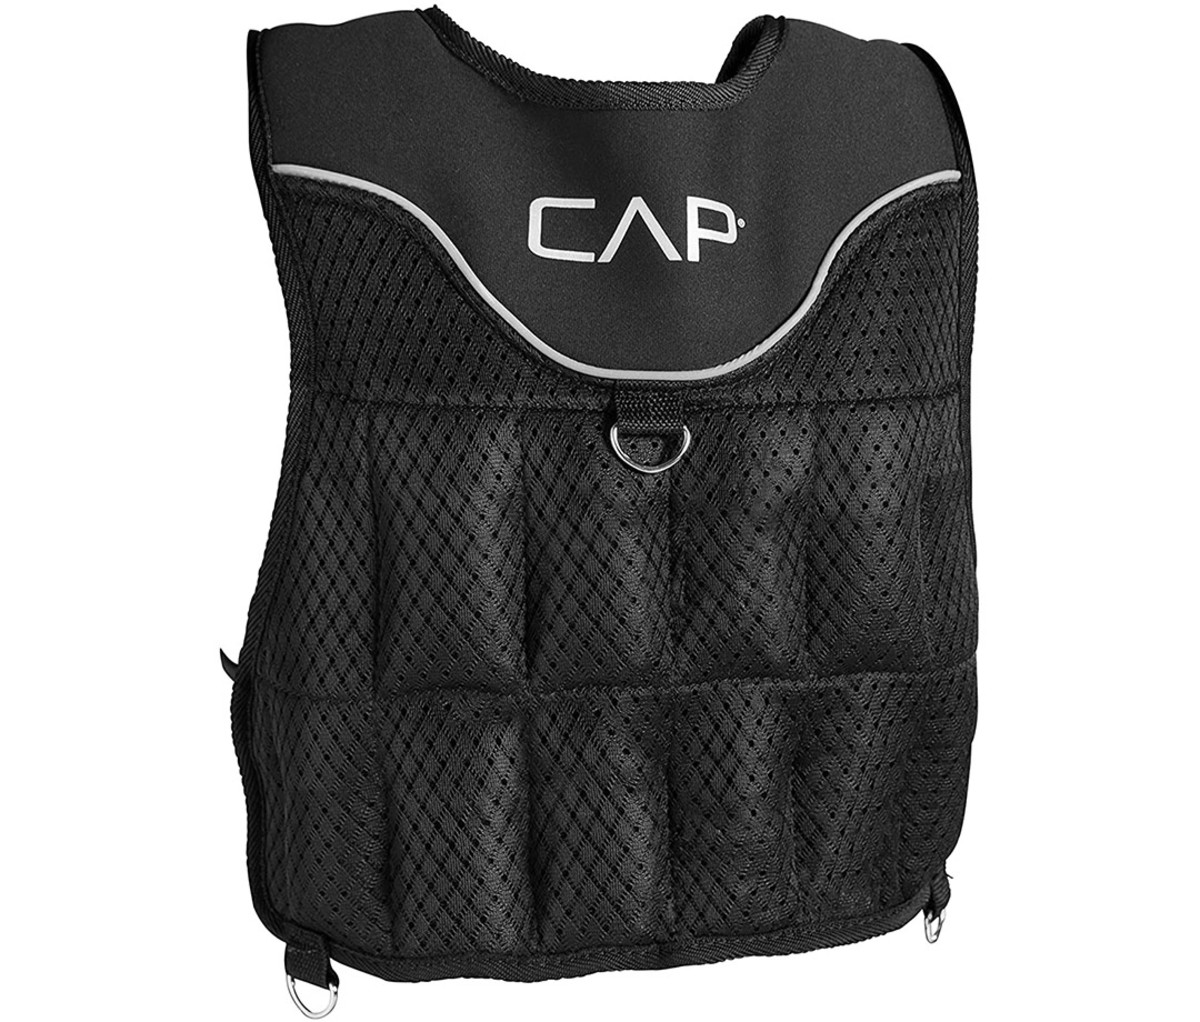 CAP Barbell Weighted Vest